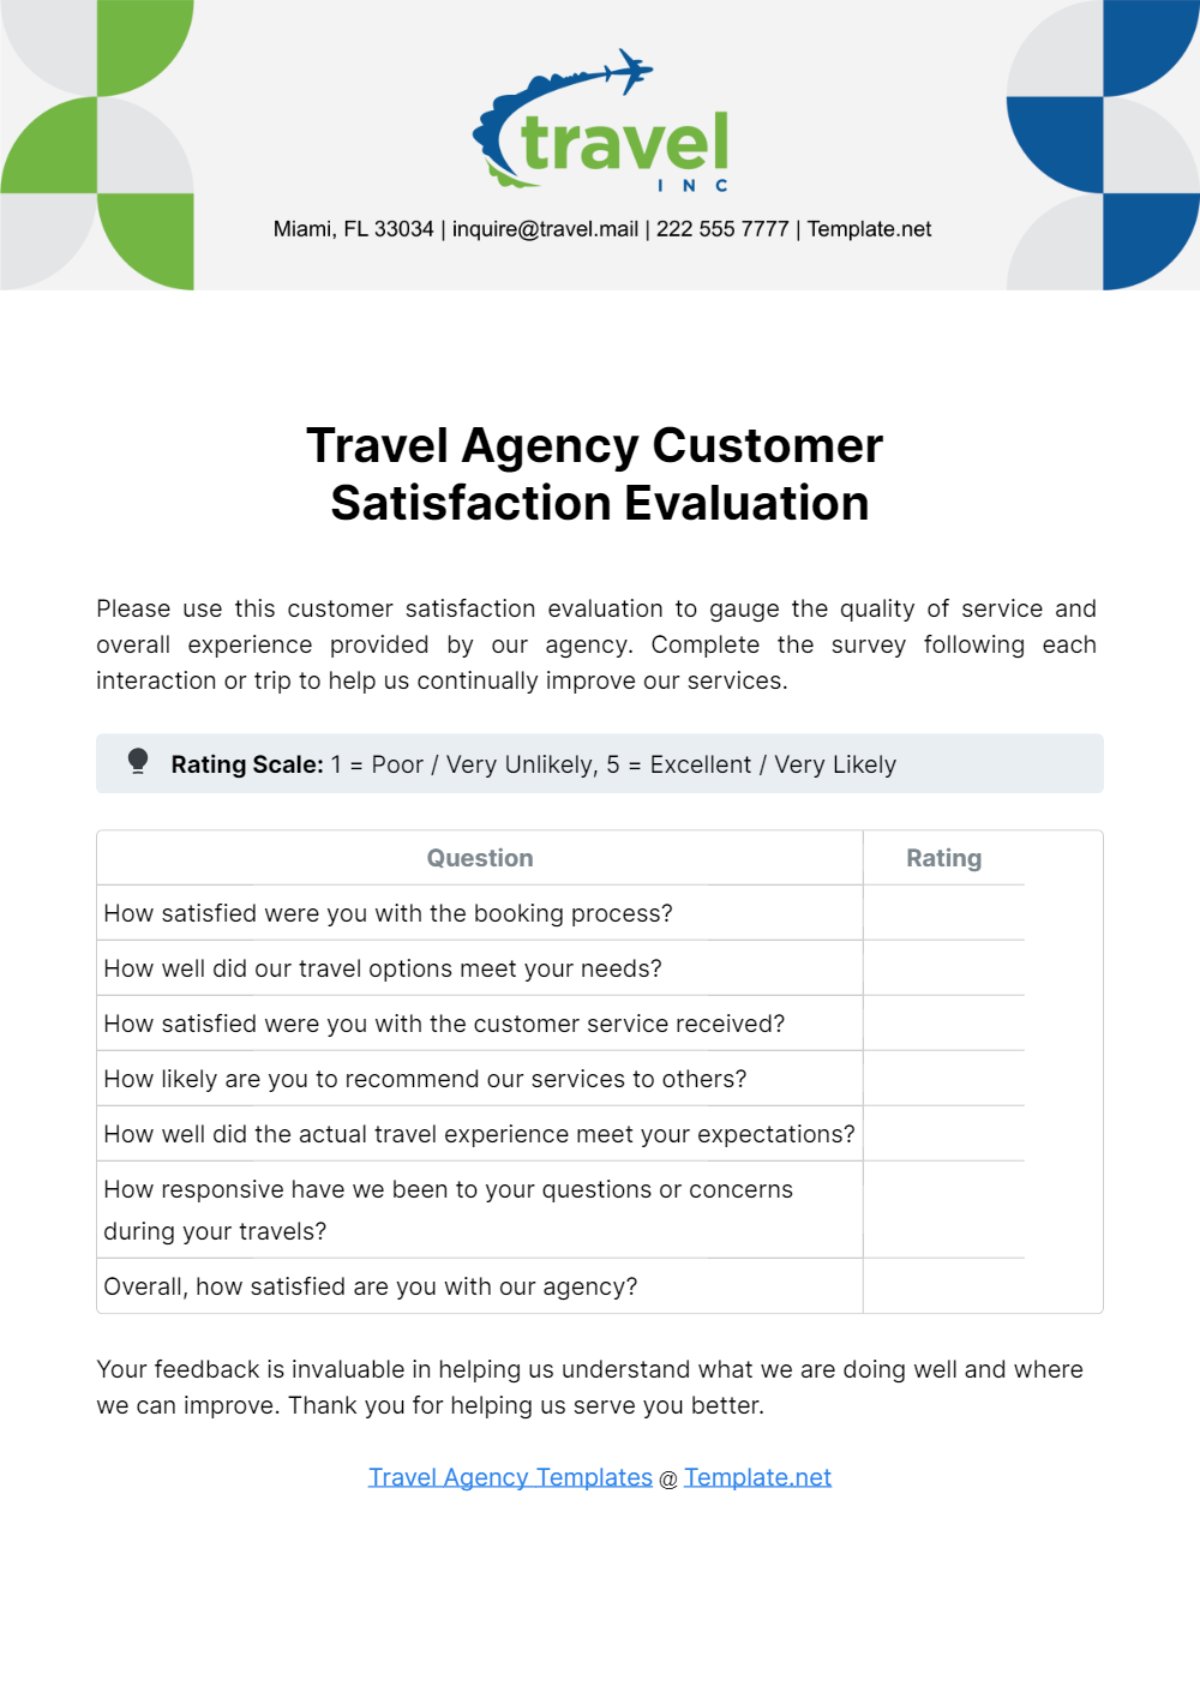 Travel Agency Customer Satisfaction Evaluation Template